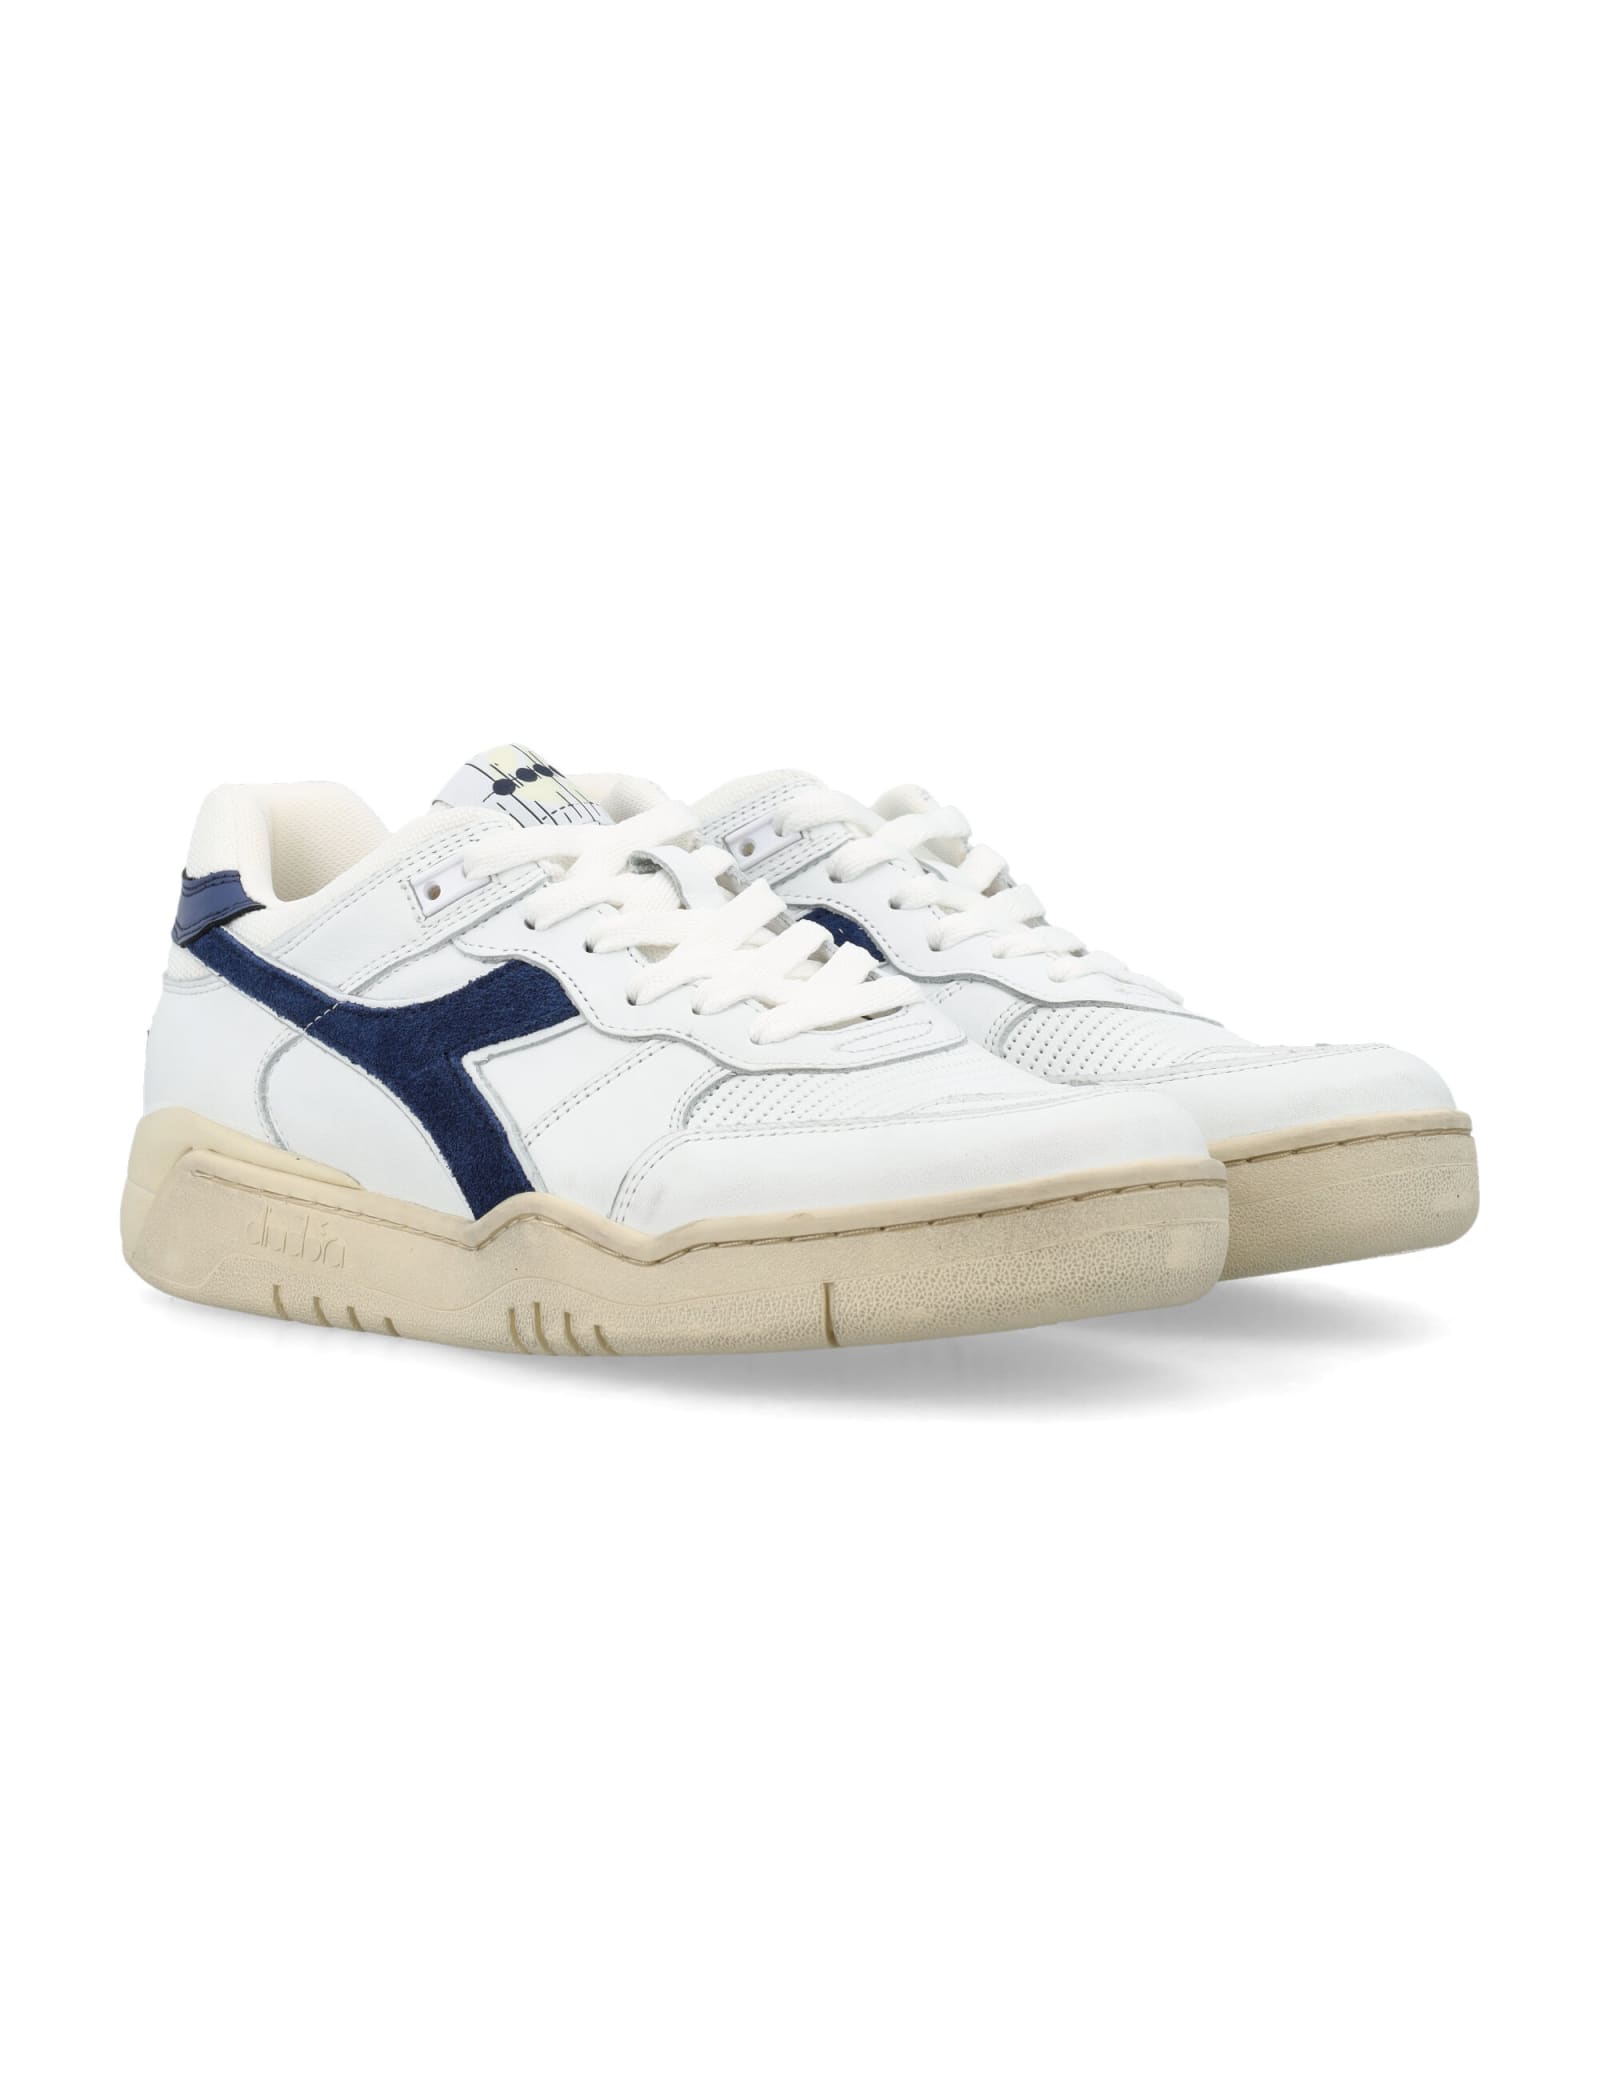 Shop Diadora B.560 Used Sneakers In White/blue